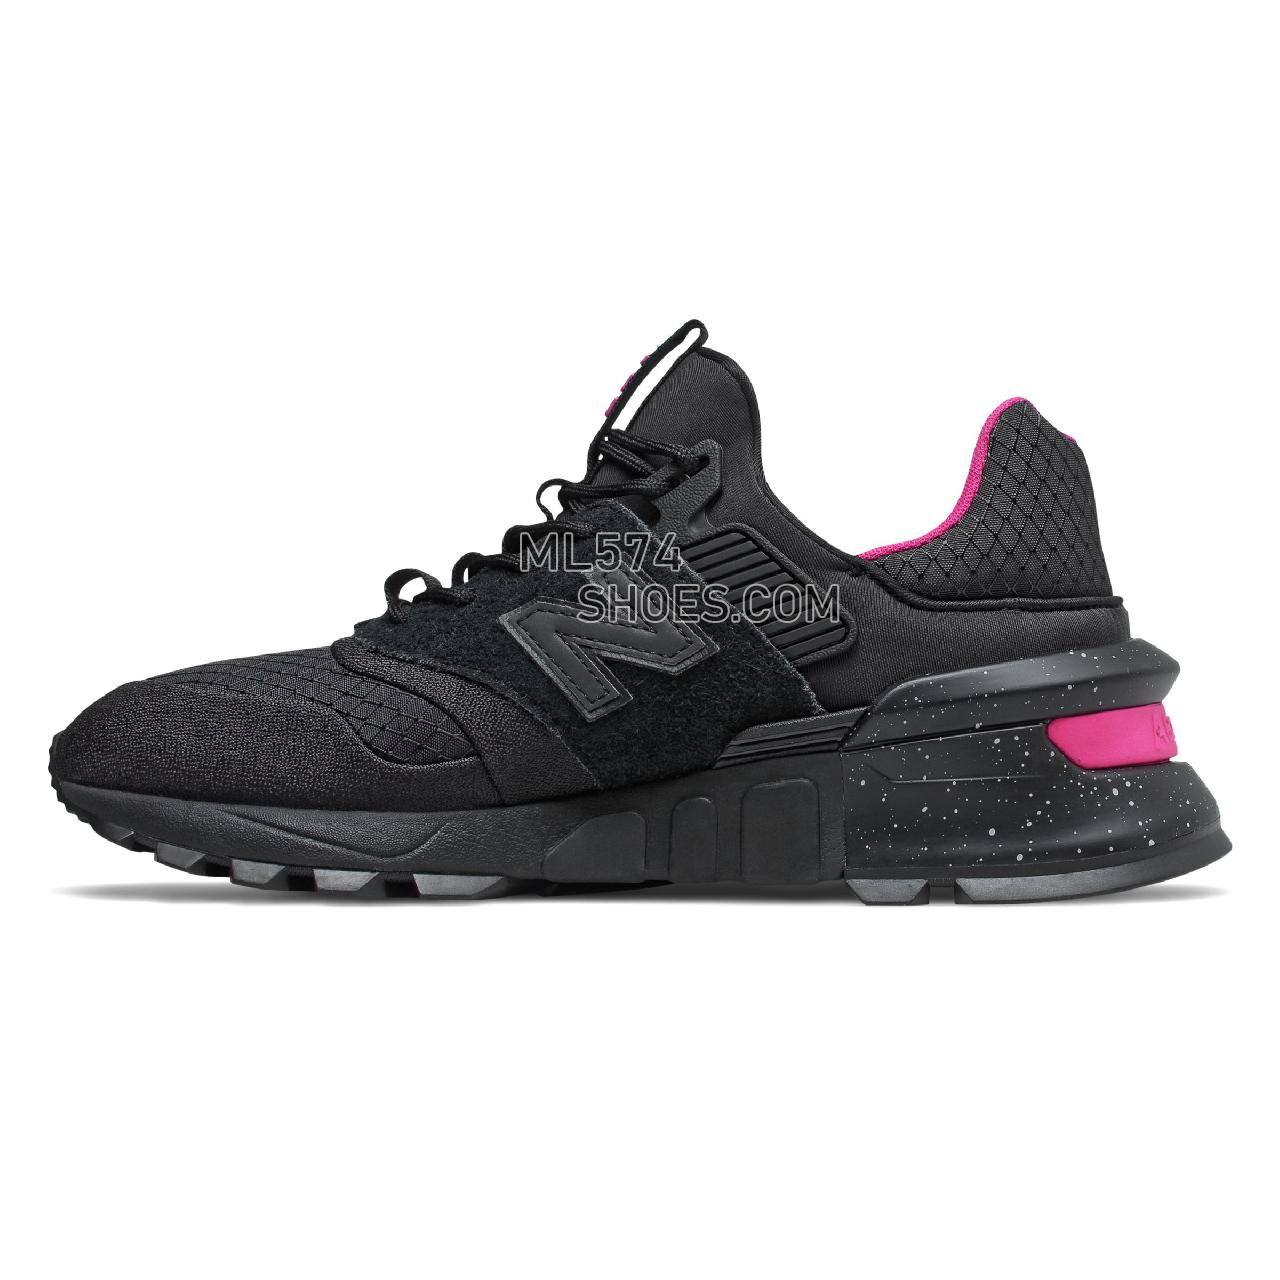 New Balance 997 Sport - Men's Sport Style Sneakers - Black with Pink - MS997SBP